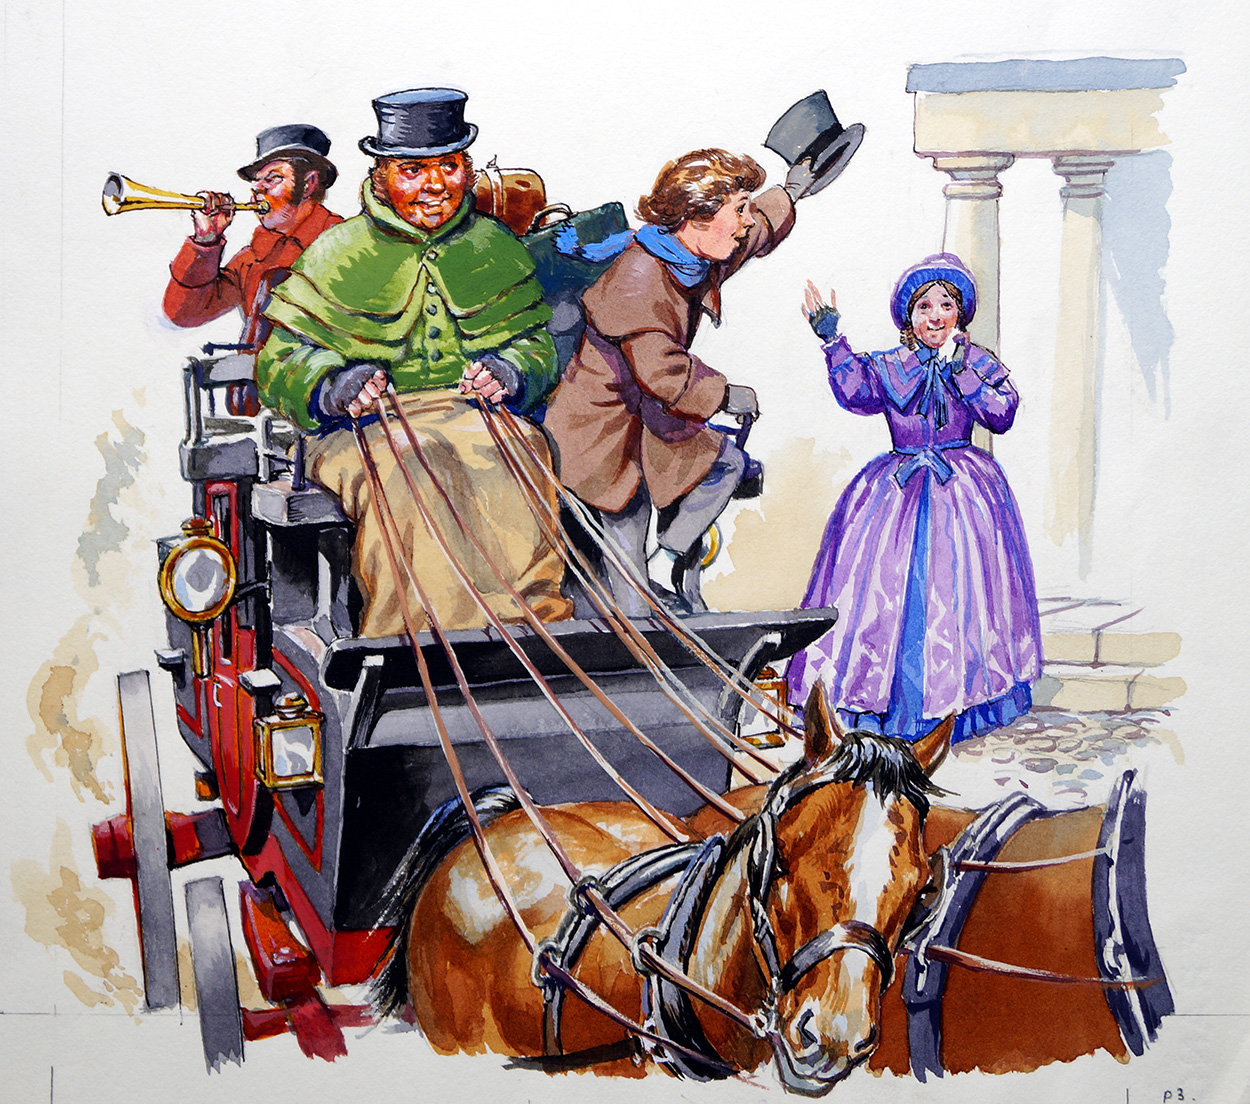 David Copperfield Leaves Home (Original) art by Geoff Campion at The Illustration Art Gallery